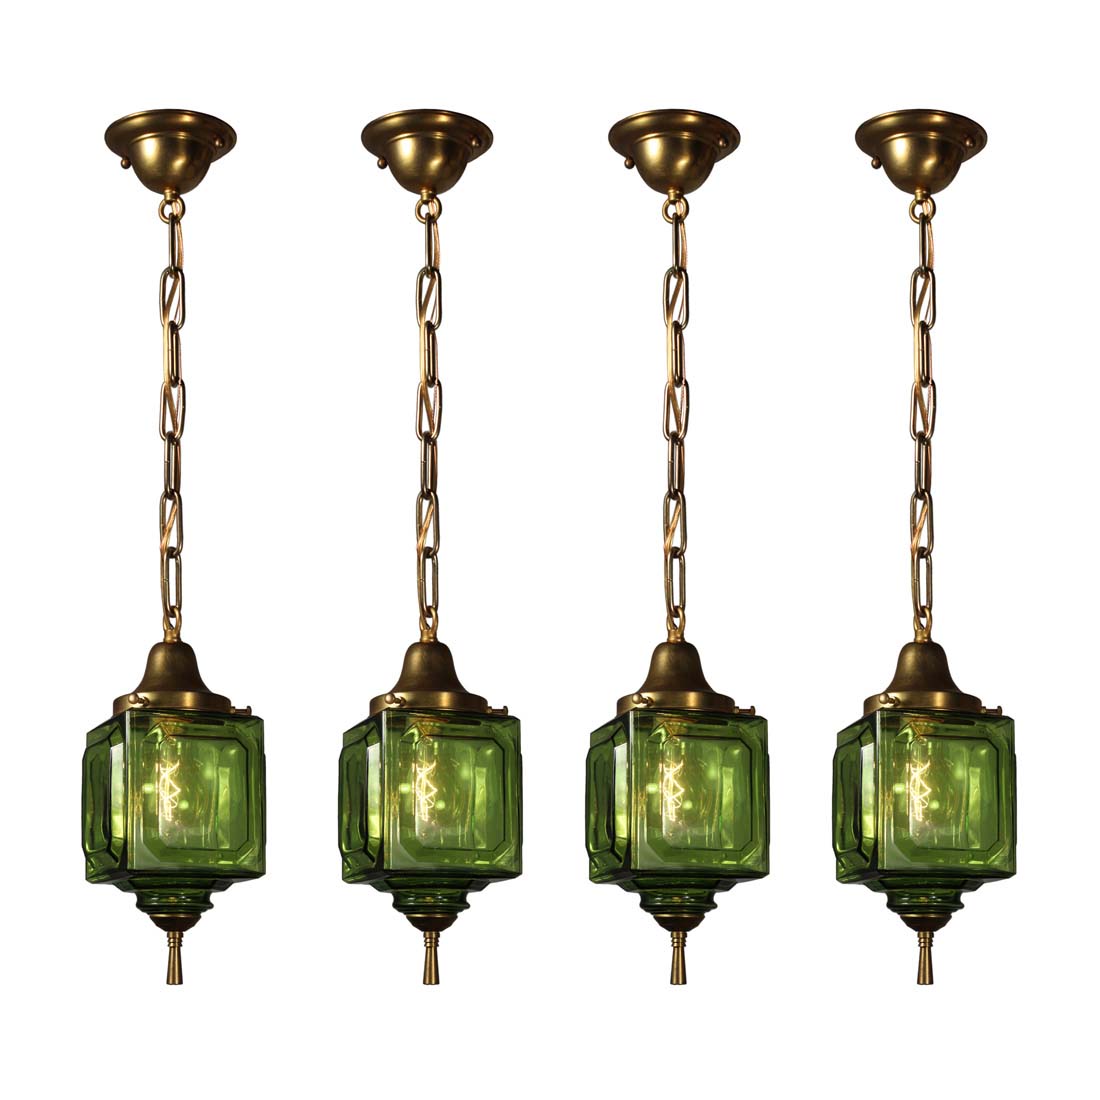 pepermunt ik klaag Gloed Matching Vintage New Old Stock Pendant Lights with Green Glass Shades - Antique  Lighting, Ceiling, Lighting, Pair/Multiple Chandeliers, Pendant Lighting,  Recent Arrivals - The Preservation Station